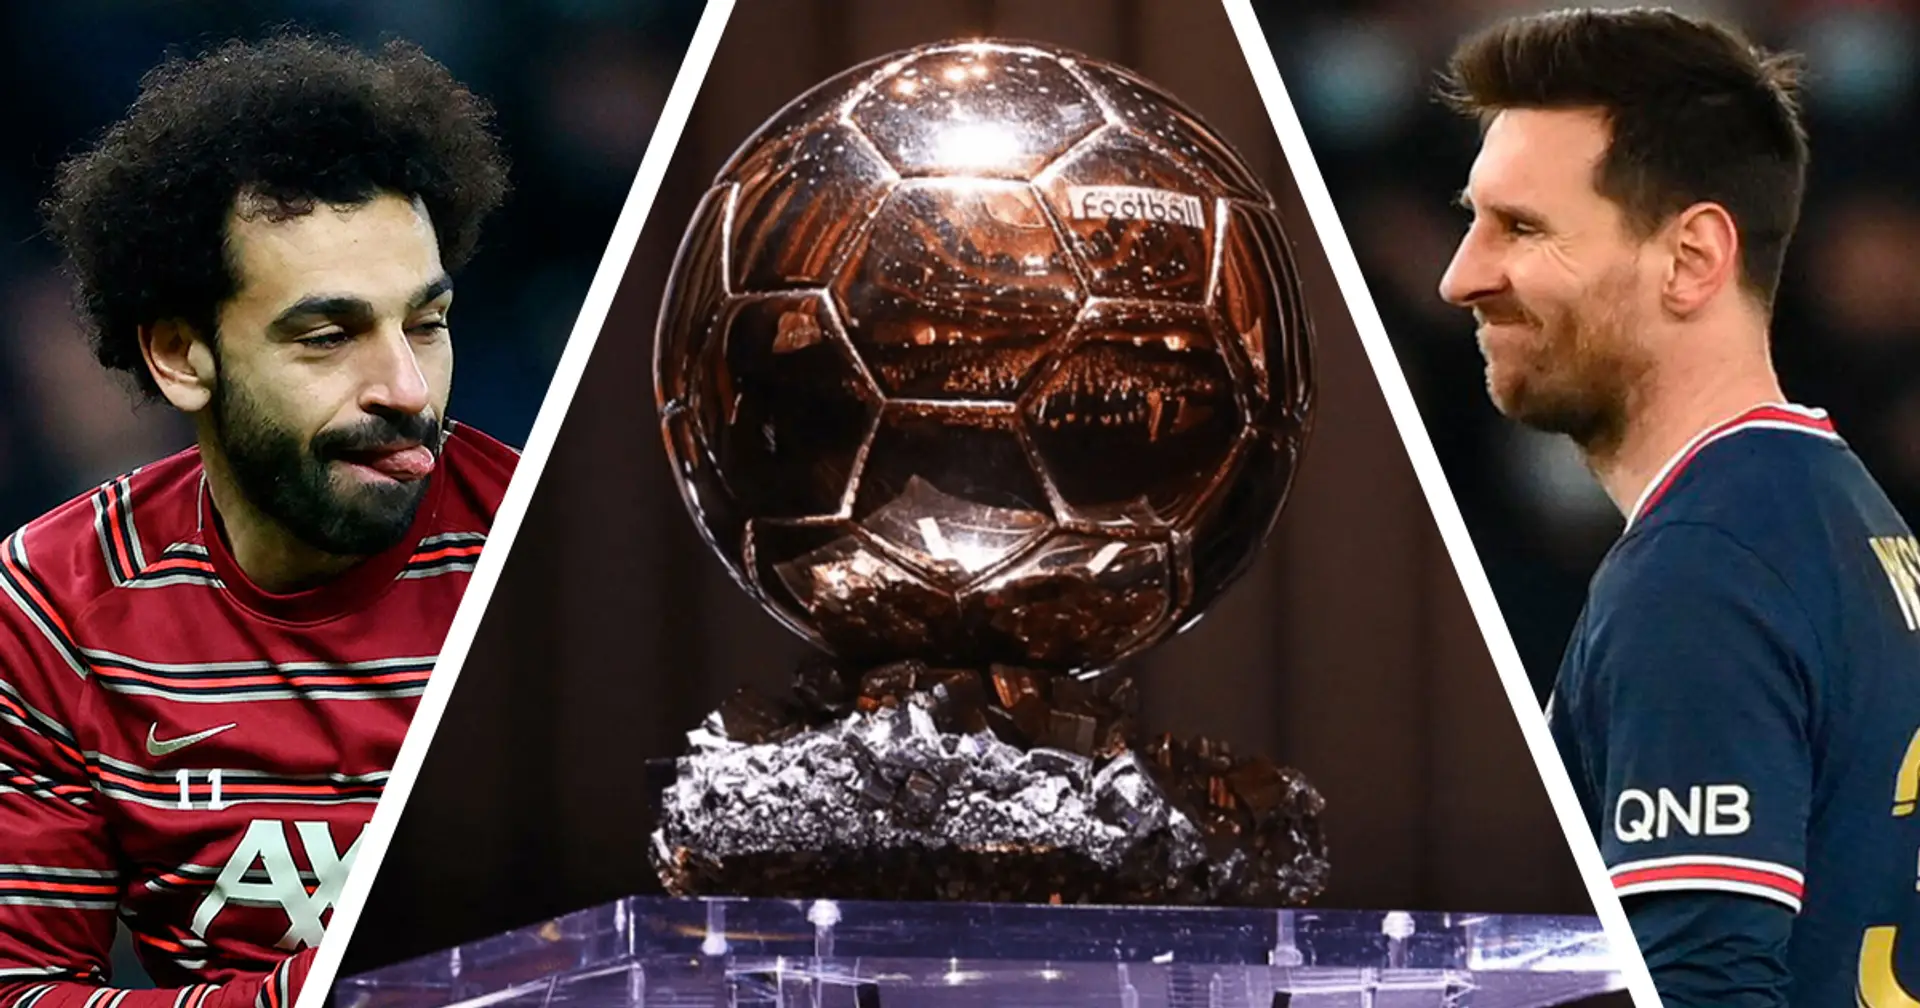 2022 Ballon d'Or power rankings: Messi outside top 3